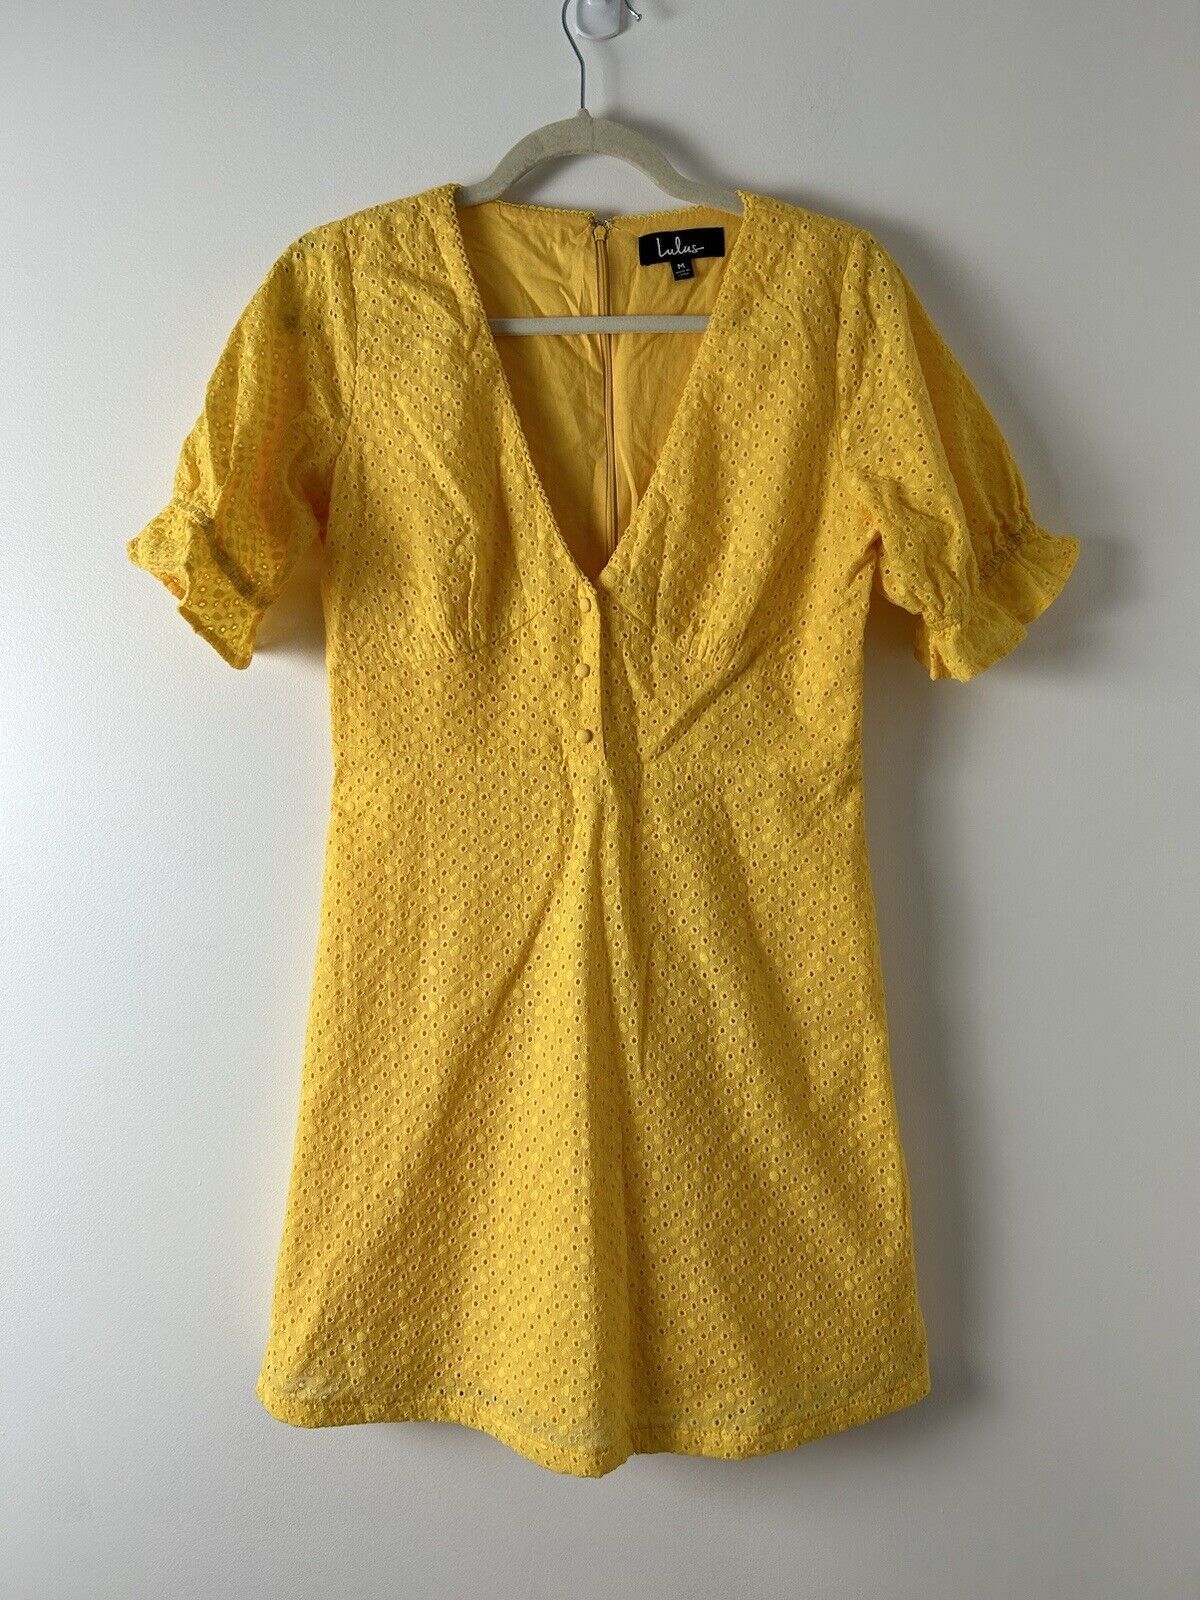 Primary image for Lulus Good to be Me Golden Yellow Eyelet Lace Midi Dress Size M